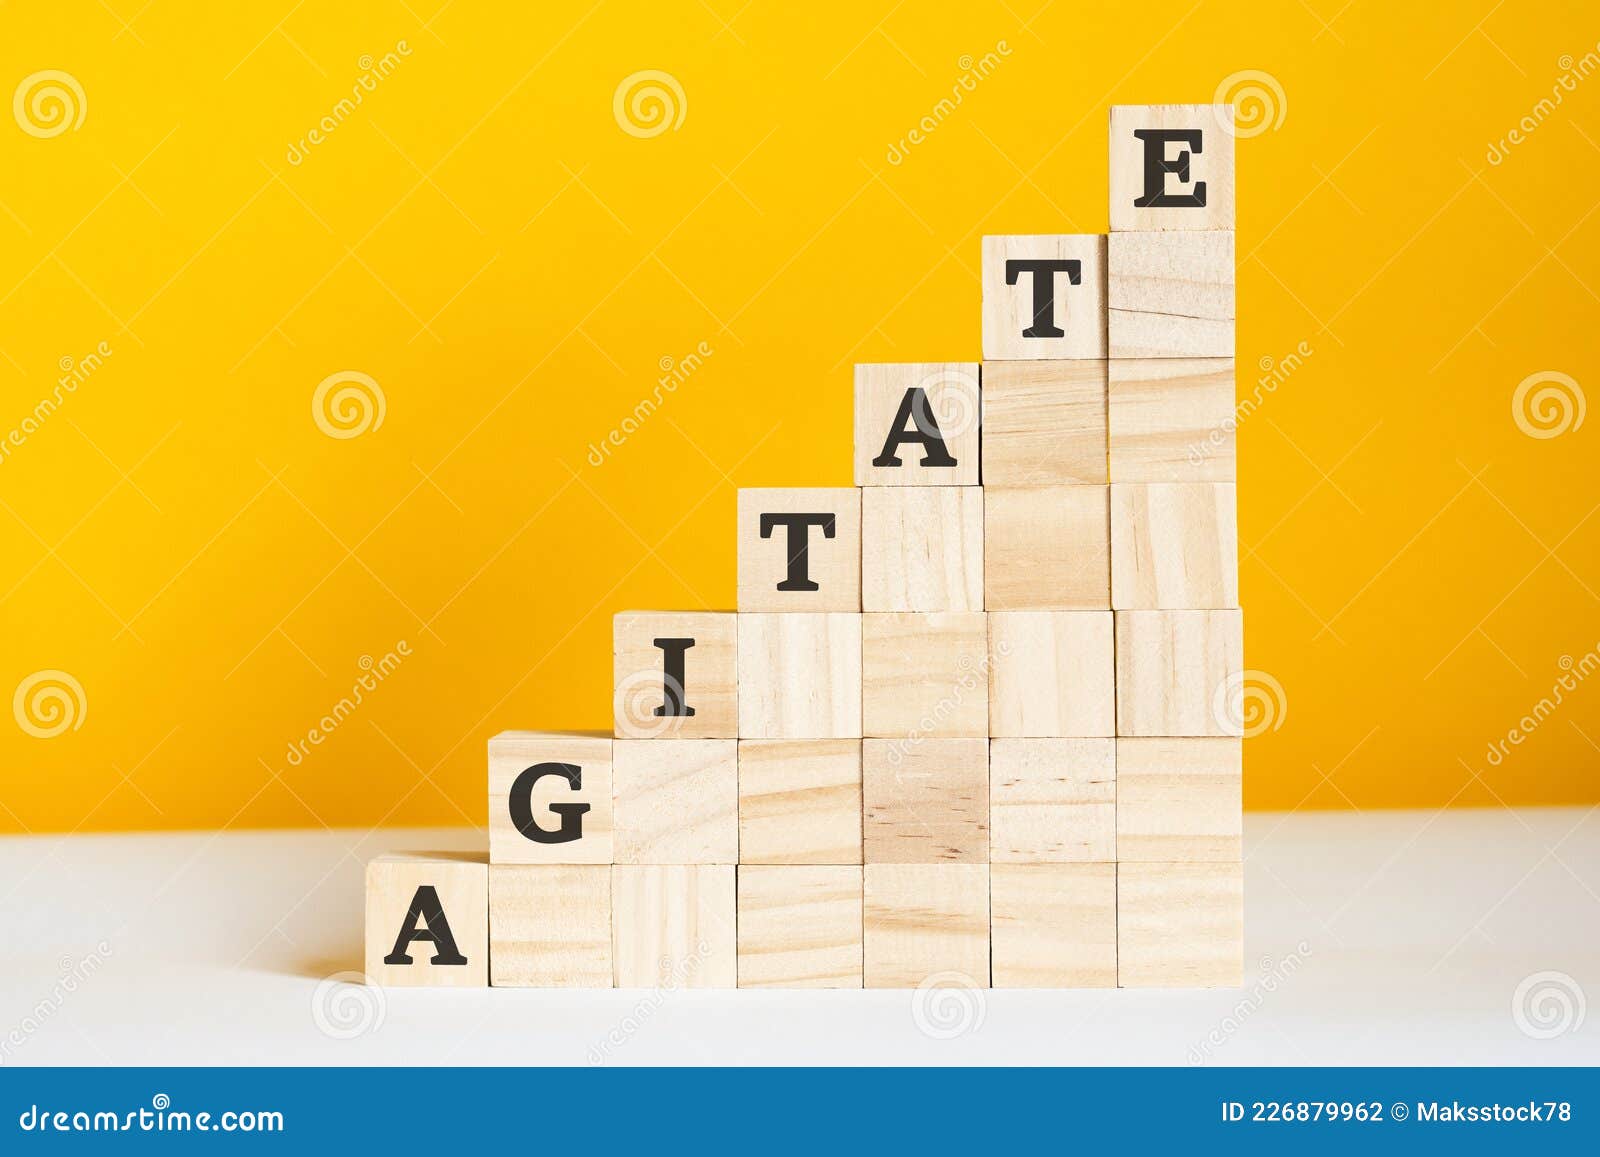 the word agitate is written on a wooden cubes, concept